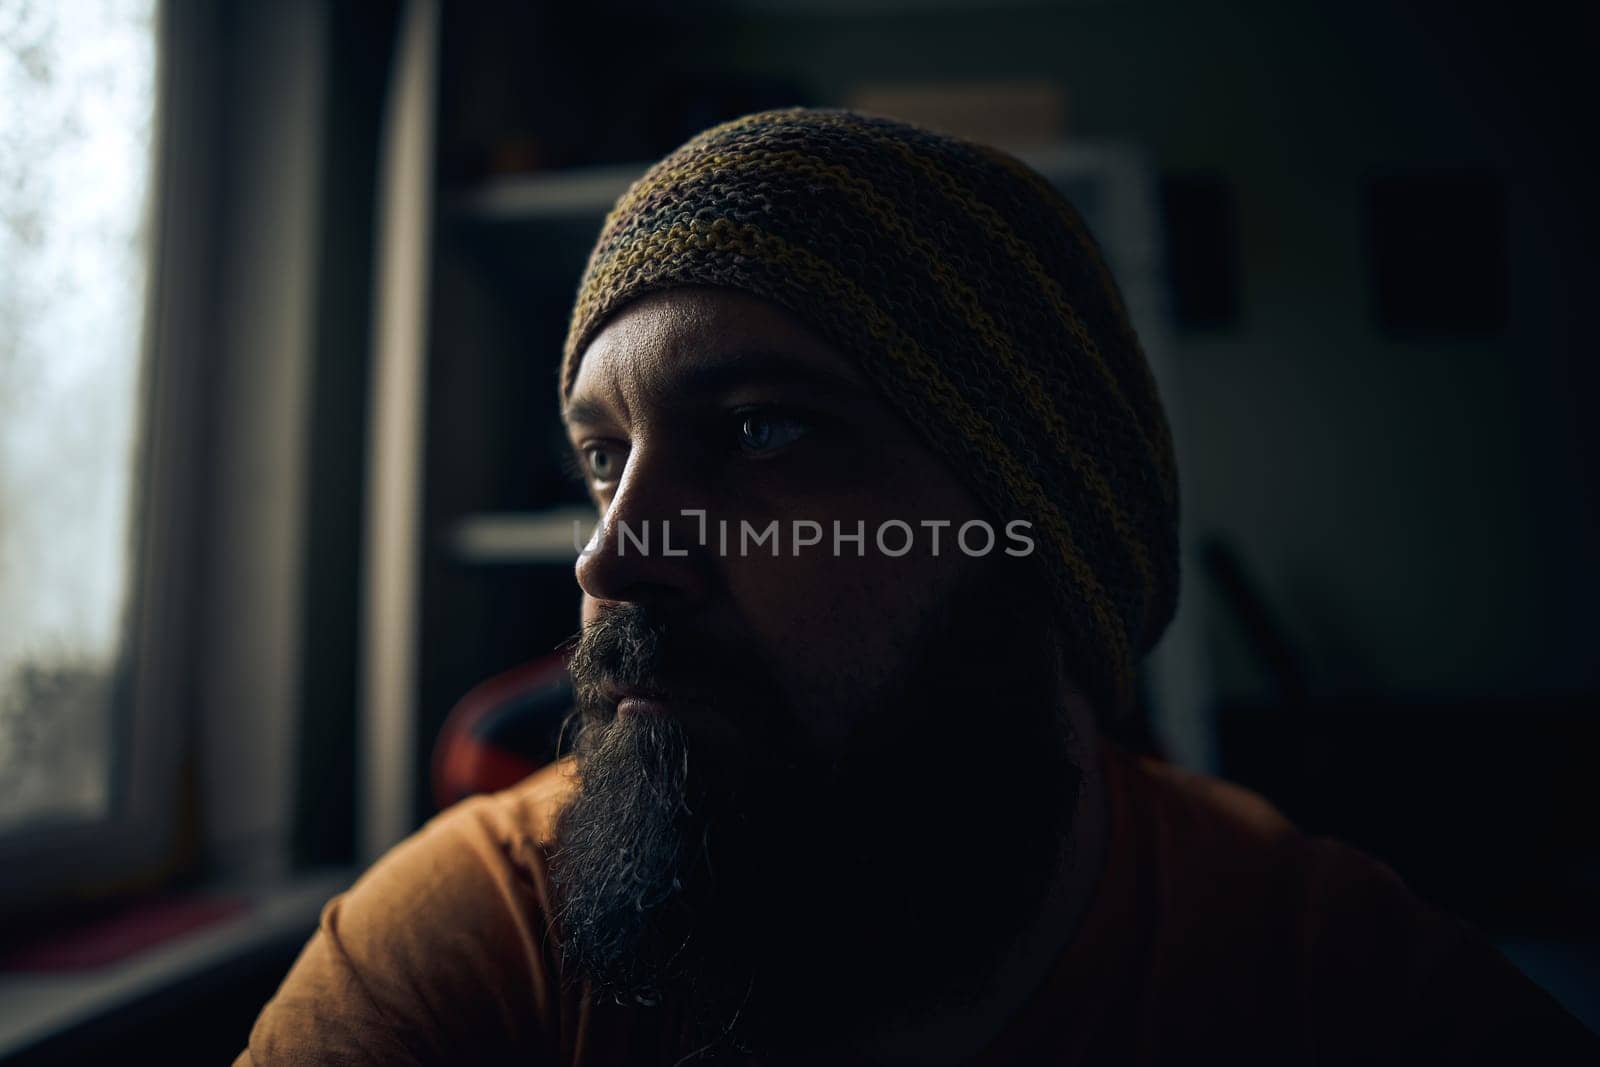 A man with a beard wearing a striped hat and t-shirt by snep_photo